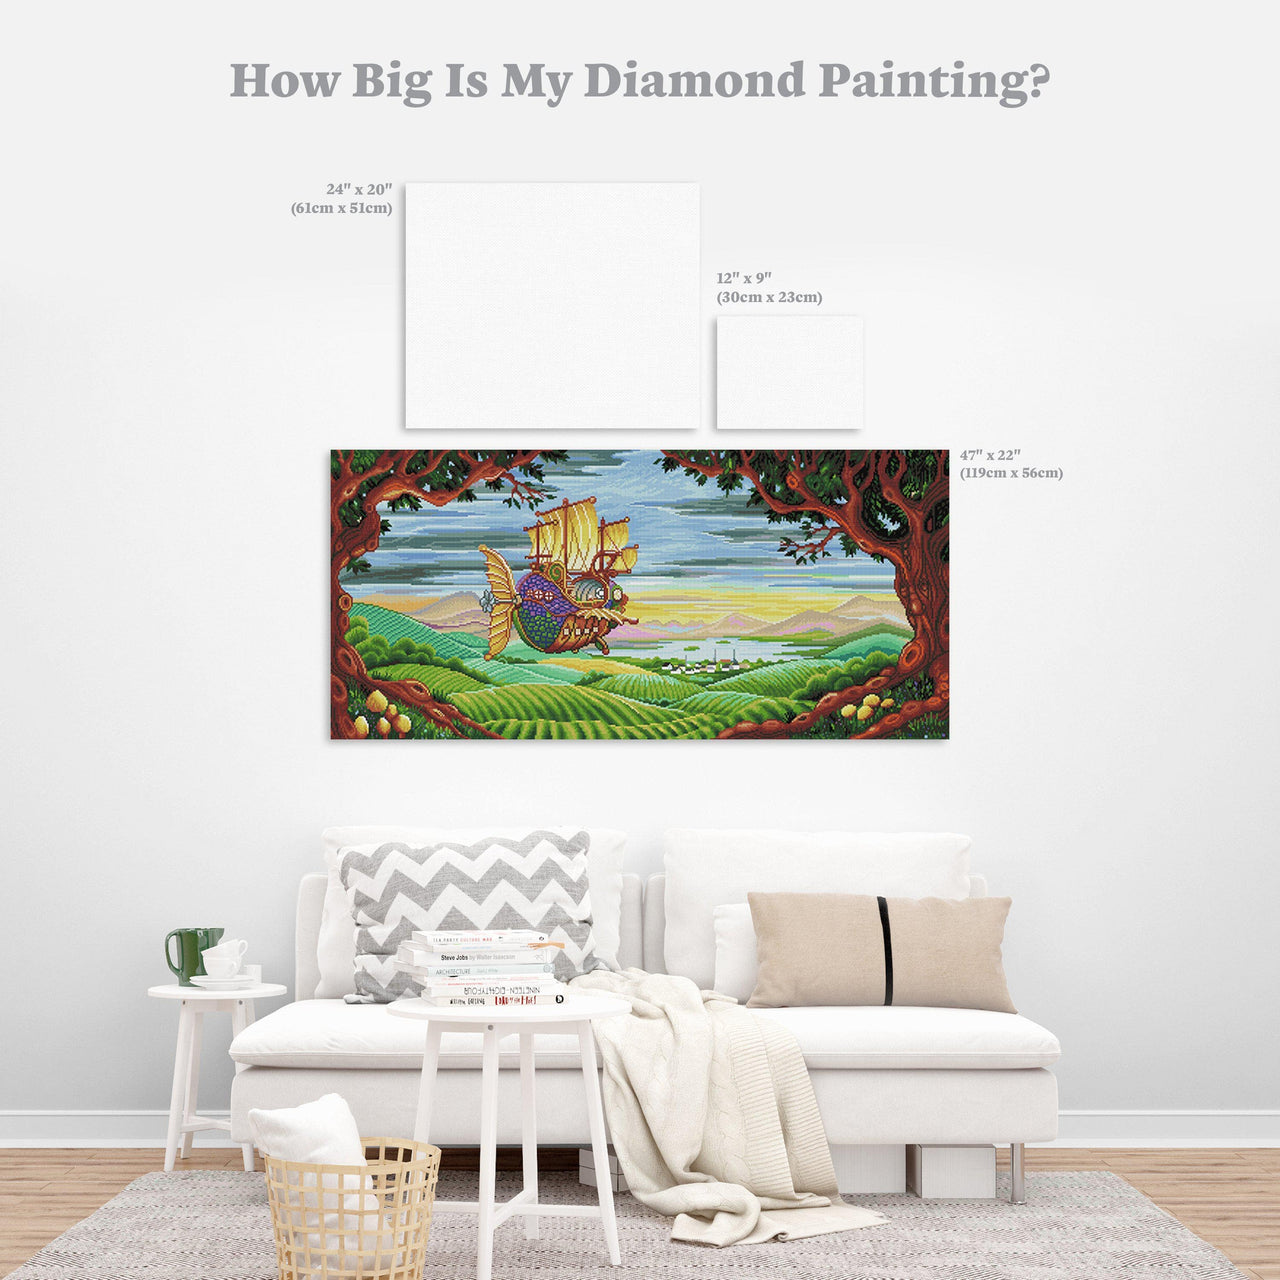 Diamond Painting Sail Away 47" x 22″ (119cm x 56cm) / Round with 51 Colors including 4 ABs / 84,376